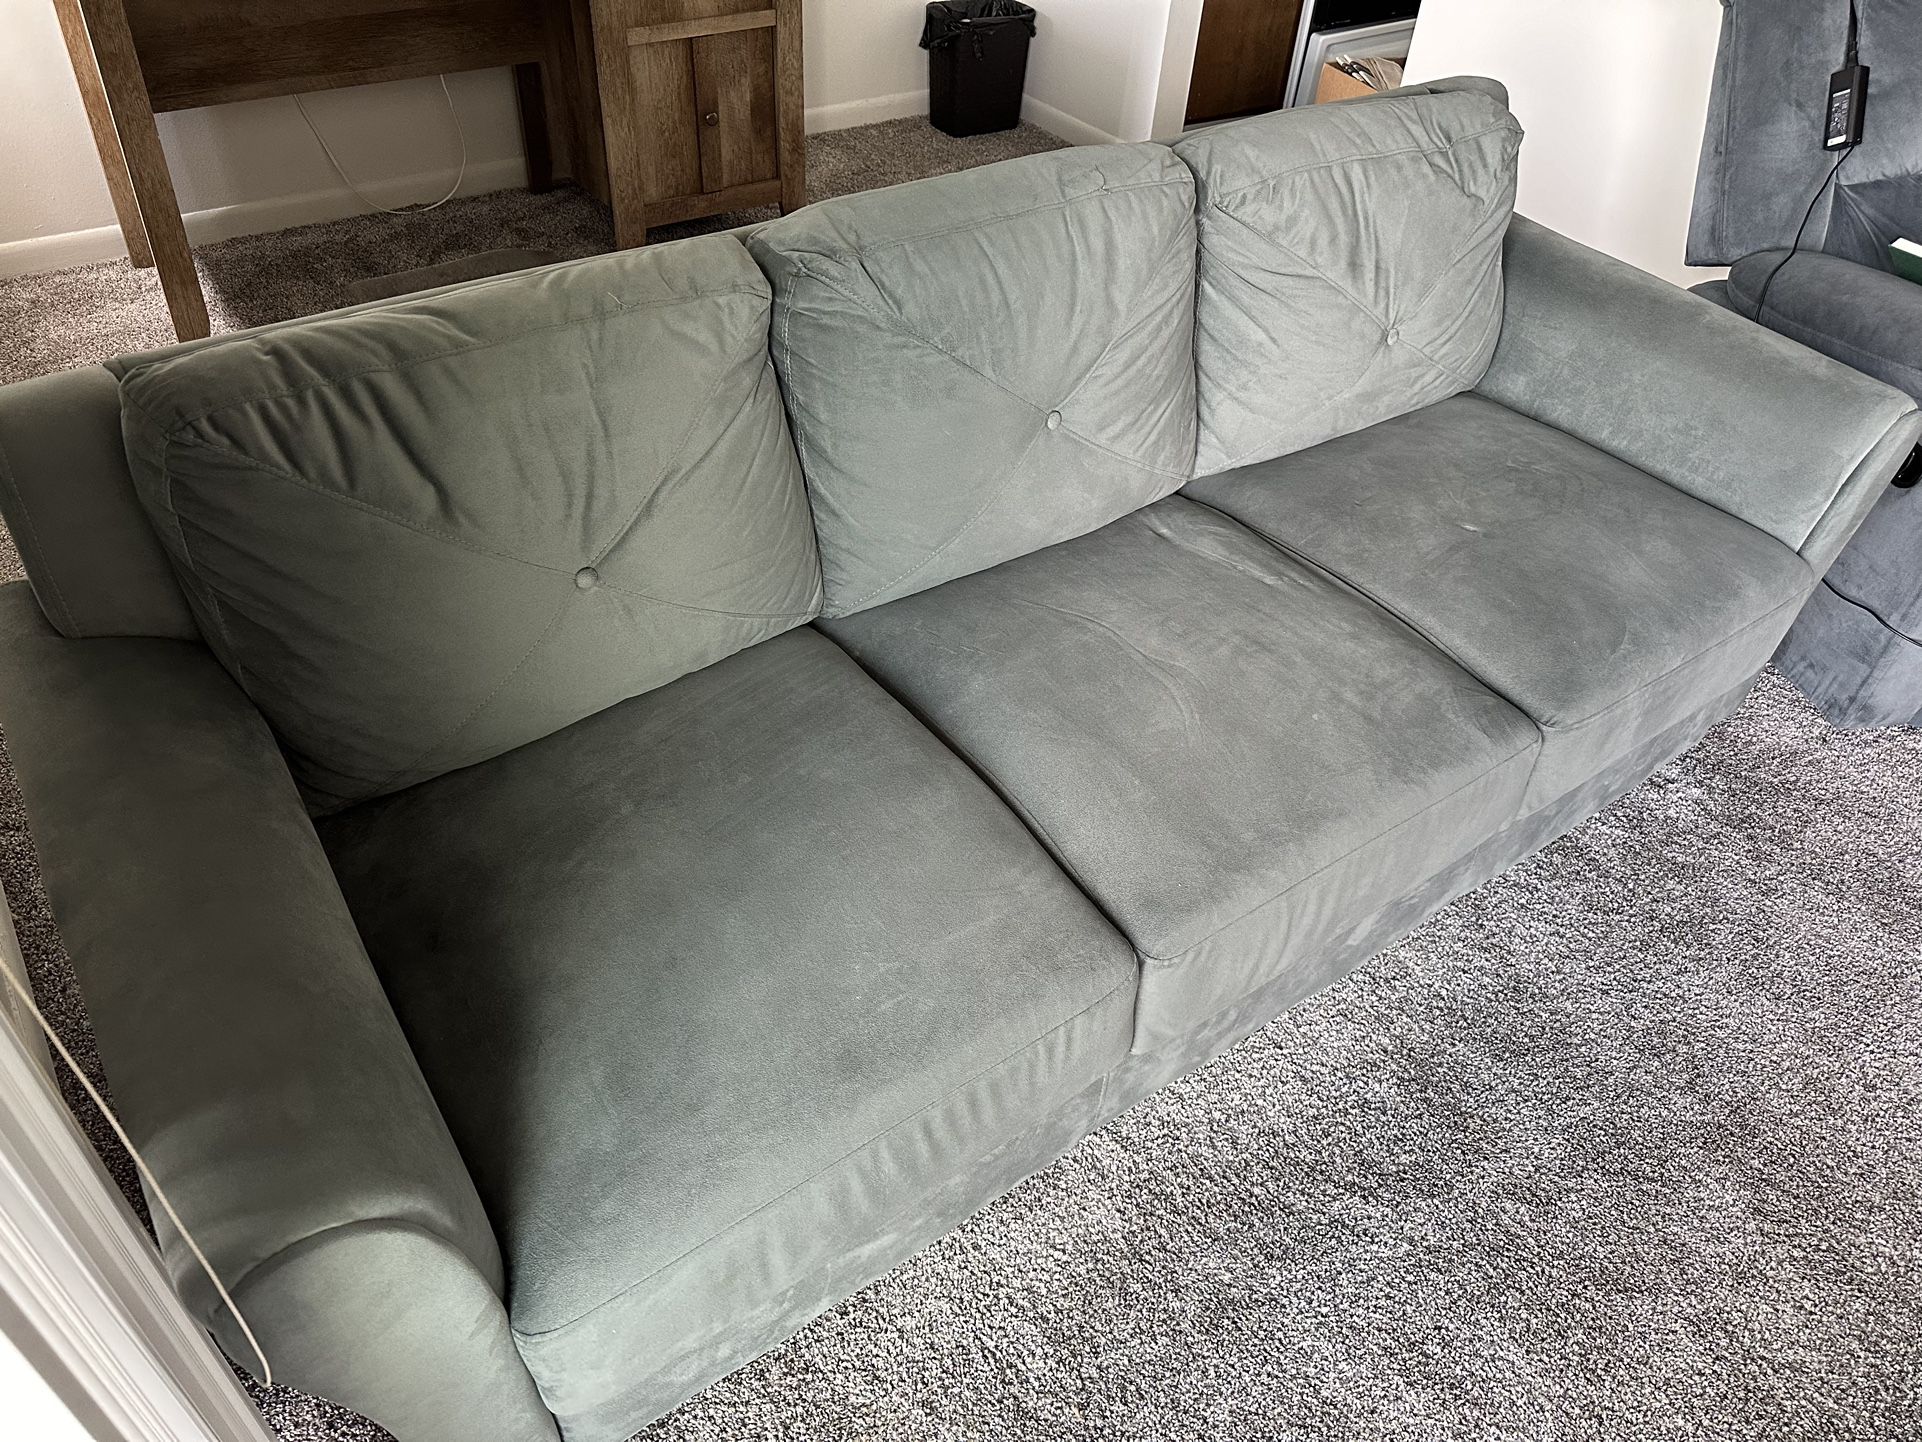 Couch For Sale (Green)